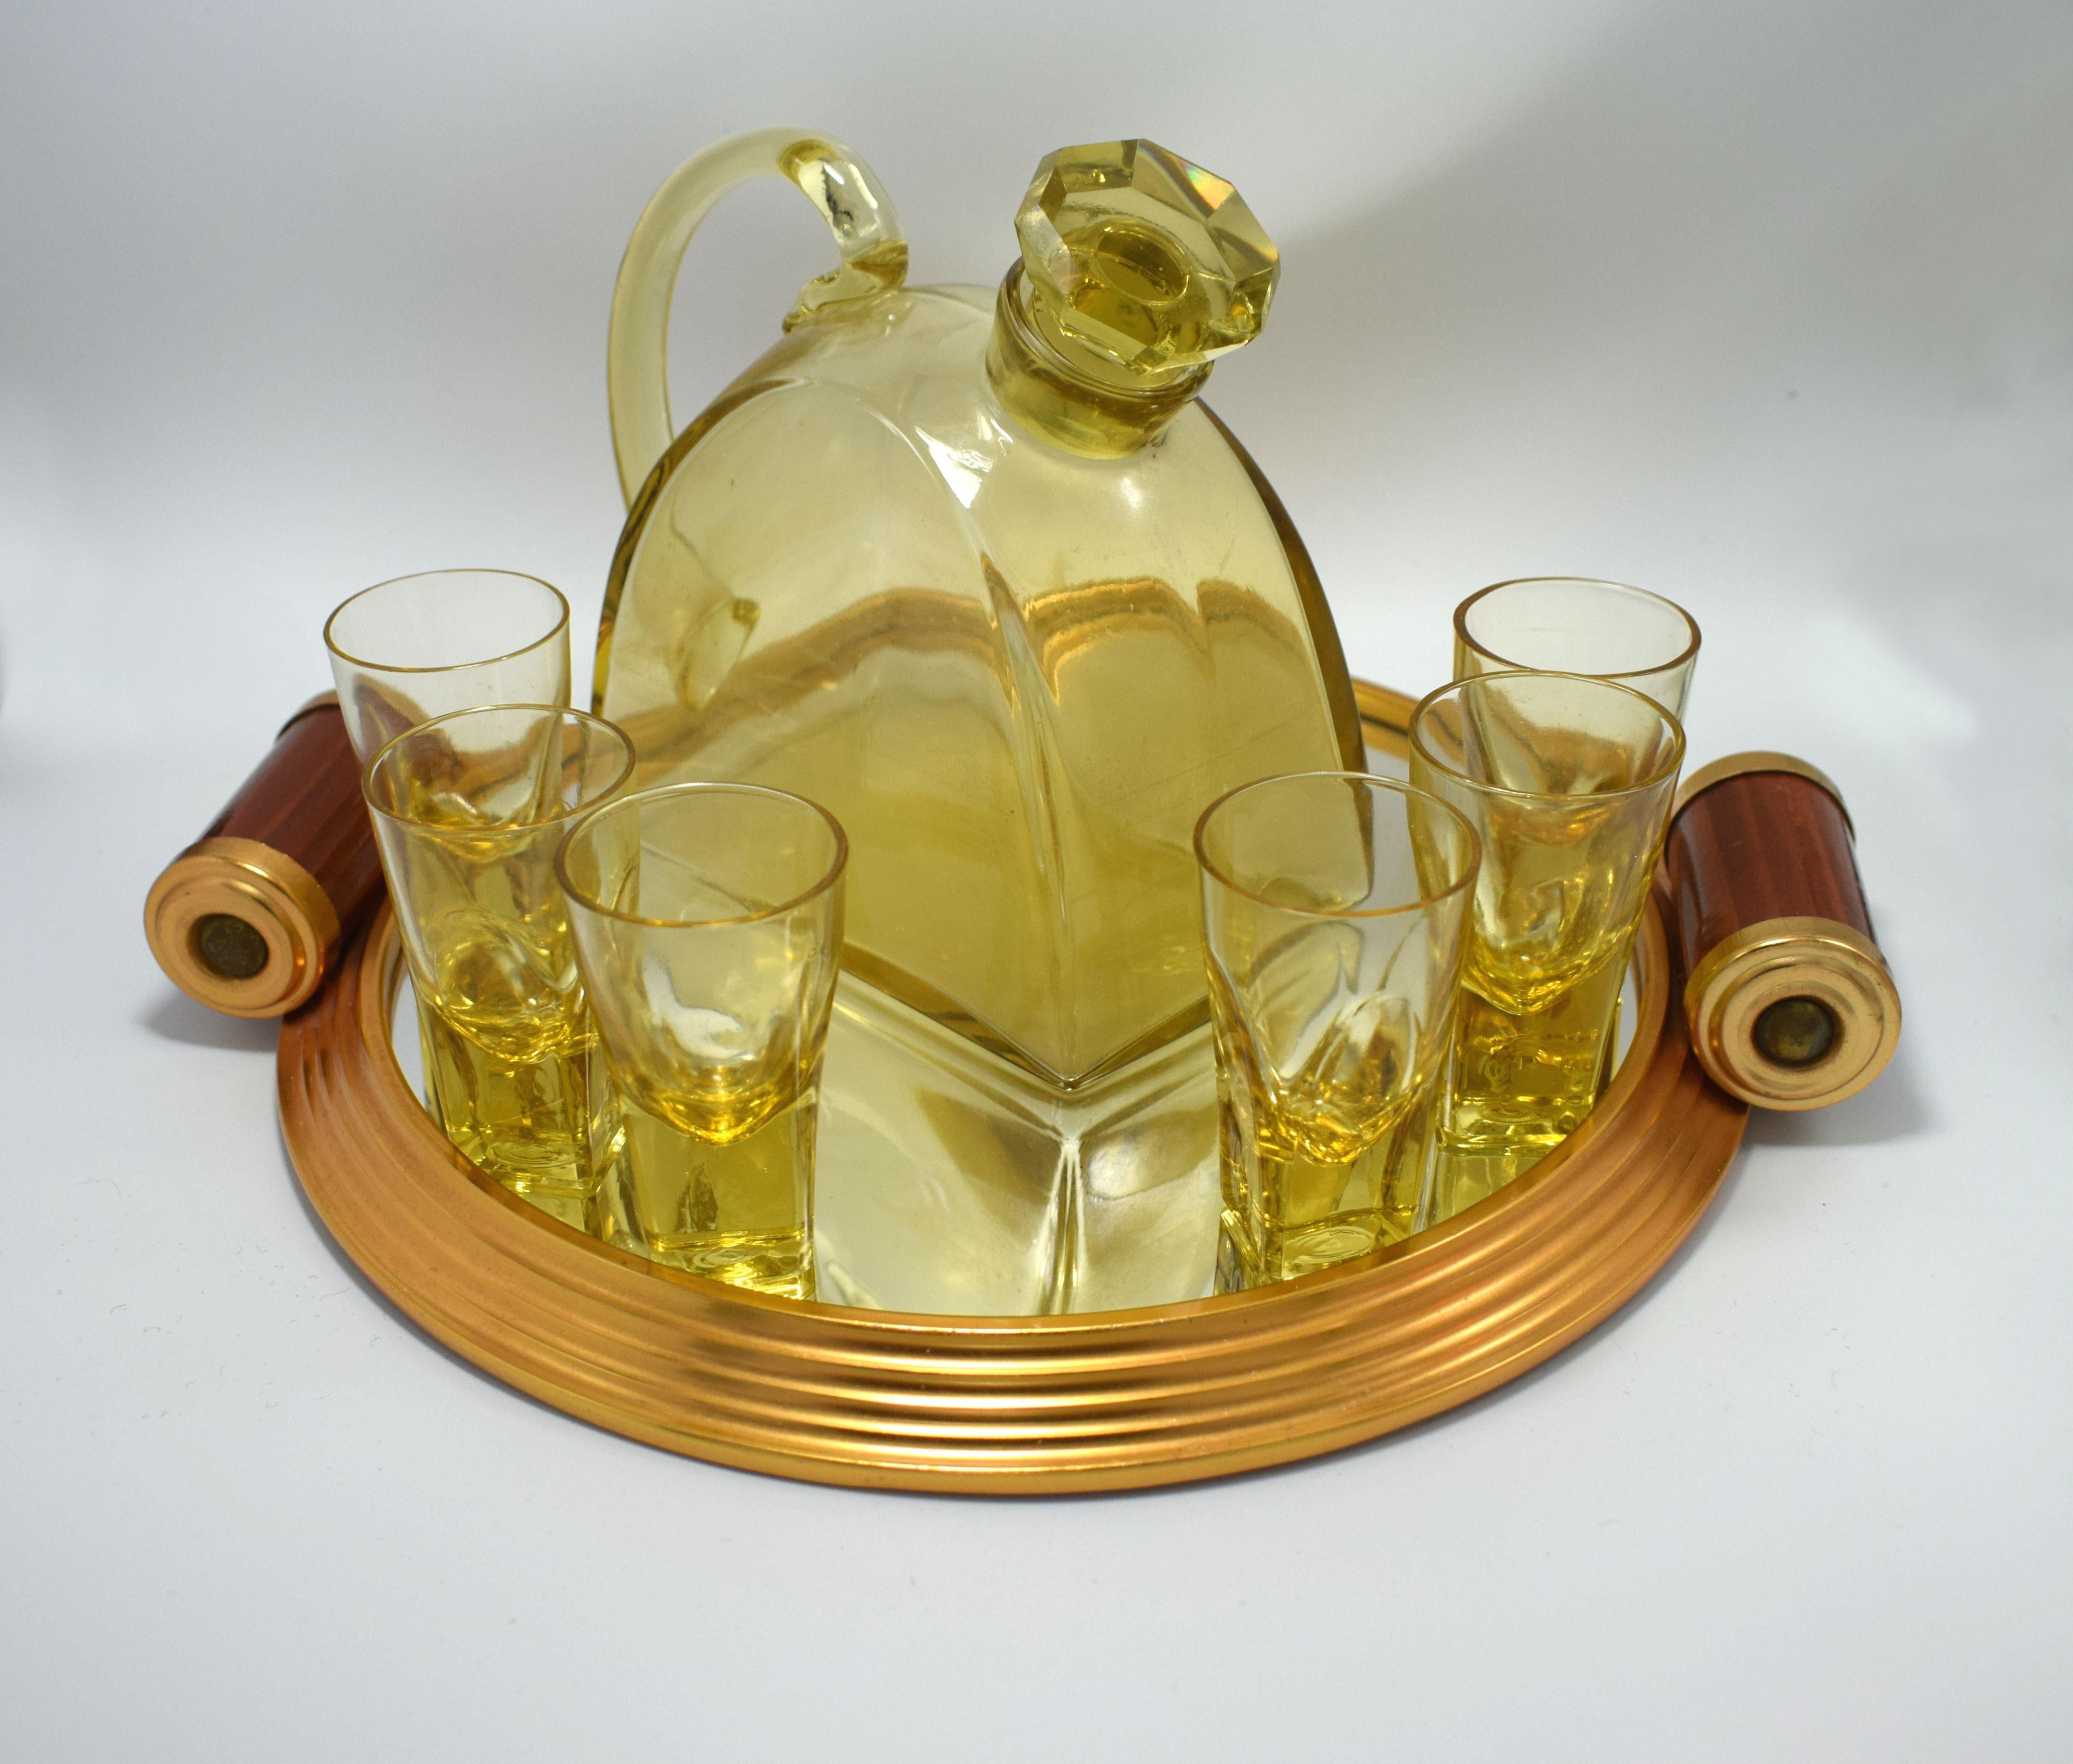 20th Century 1930s Art Deco Glass Decanter Set with Matching Tray